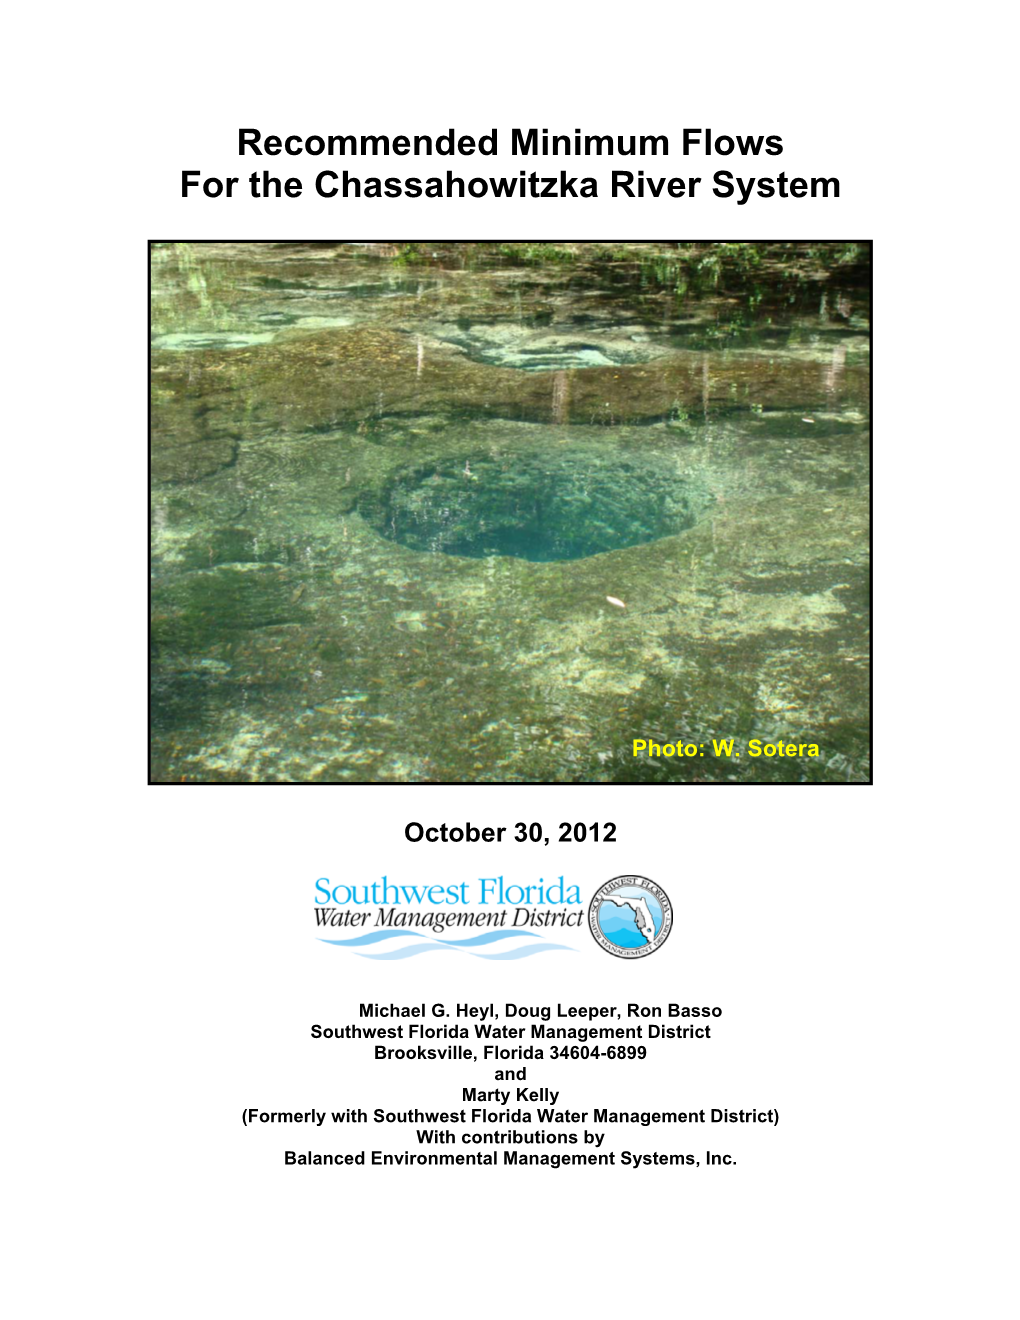 Recommended Minimum Flows for the Chassahowitzka River System